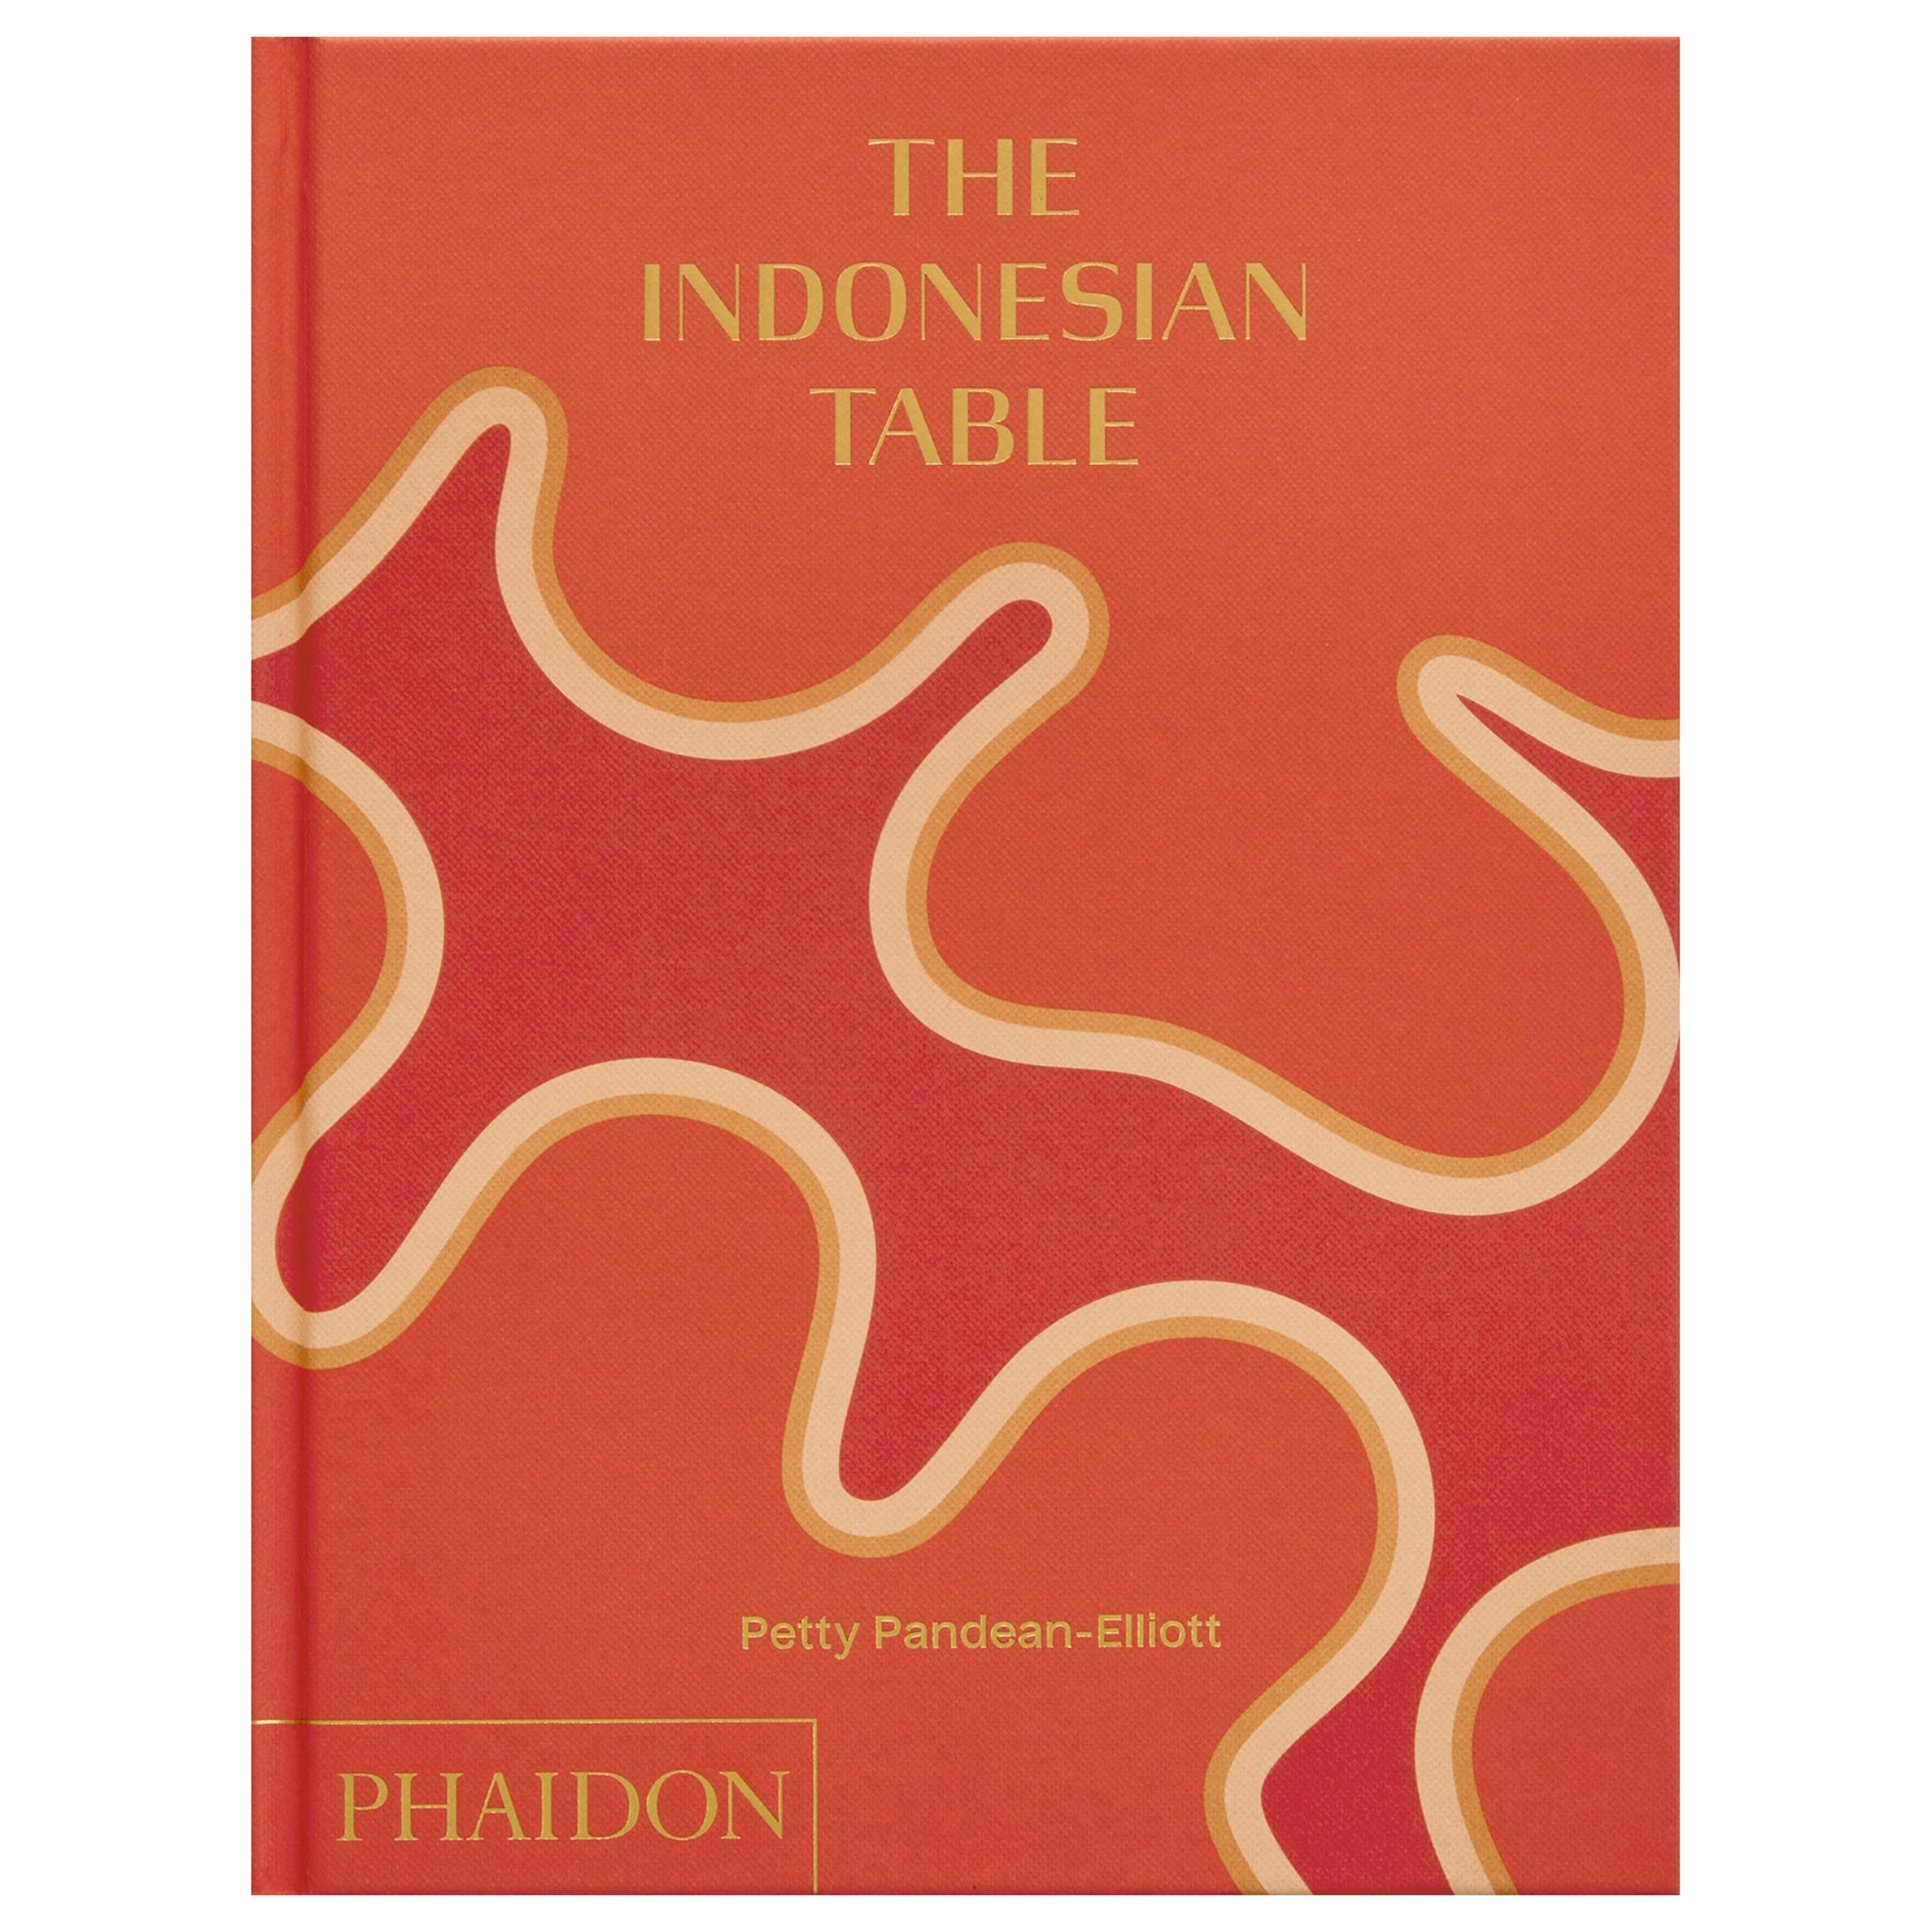 The Indonesian Table